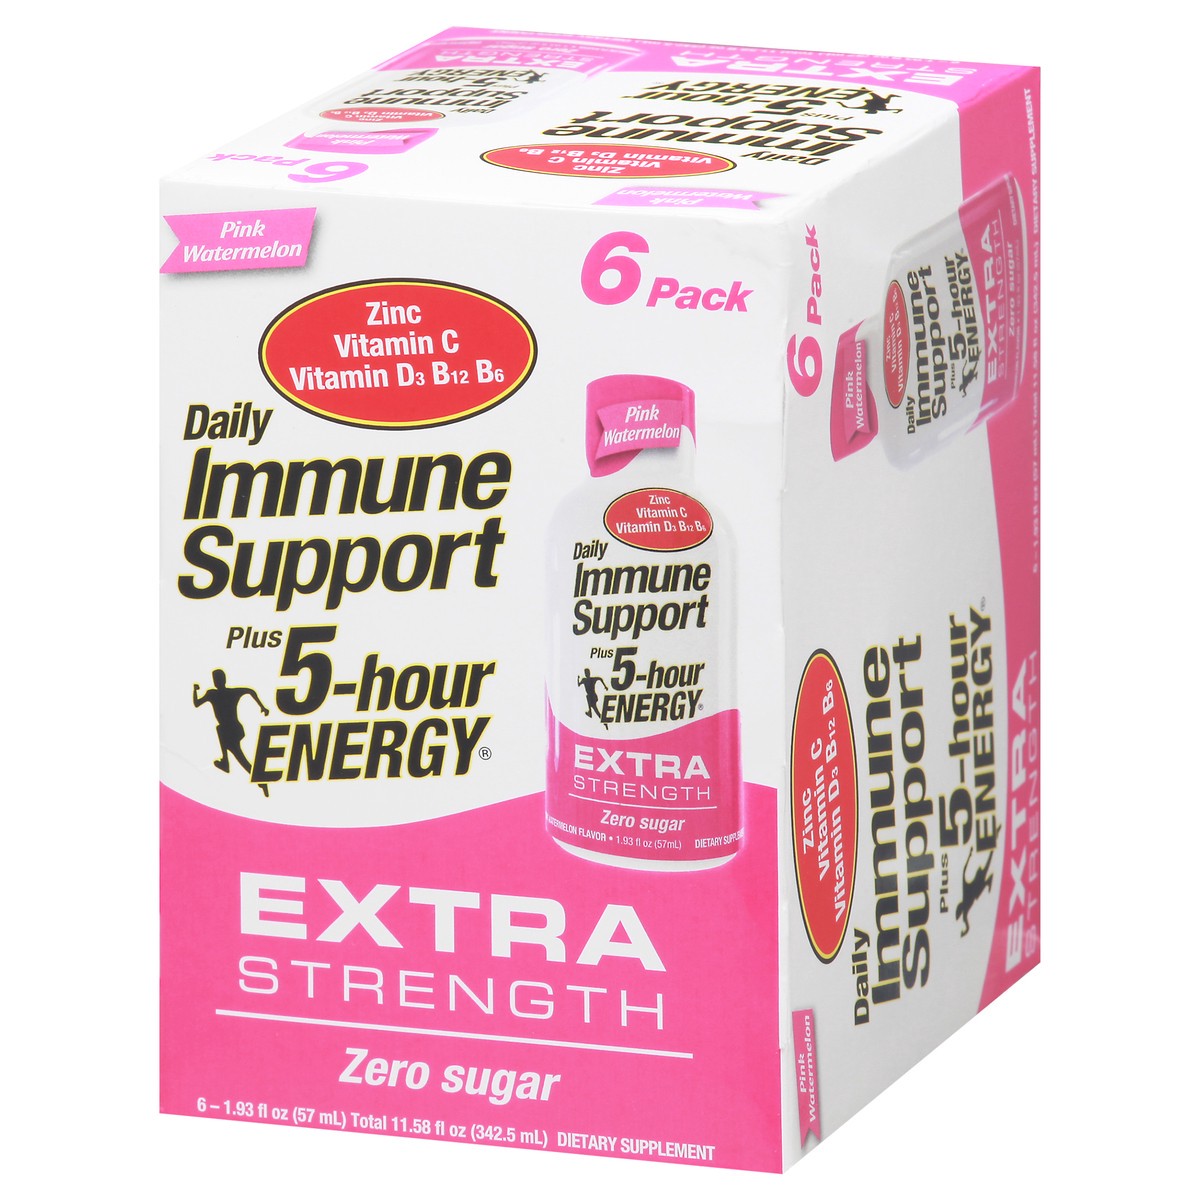 slide 10 of 14, 5-Hour Energy 6 Pack Extra Strength Pink Watermelon Daily Immune Support 6 1.93 fl oz 6 ea Box, 1.93 oz